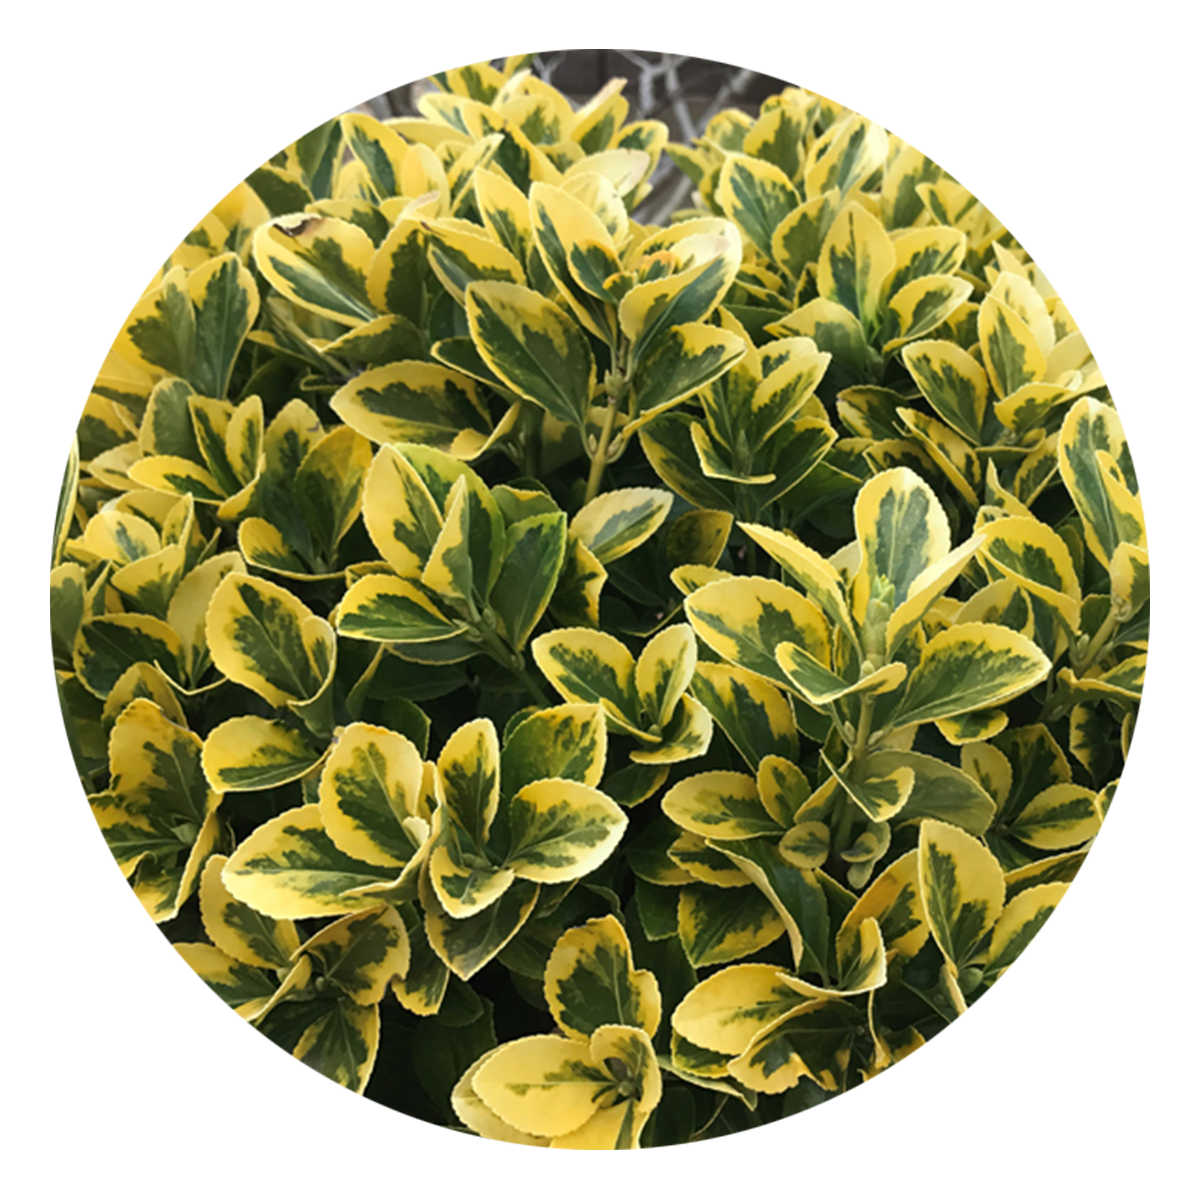 View Here: Golden Euonymus